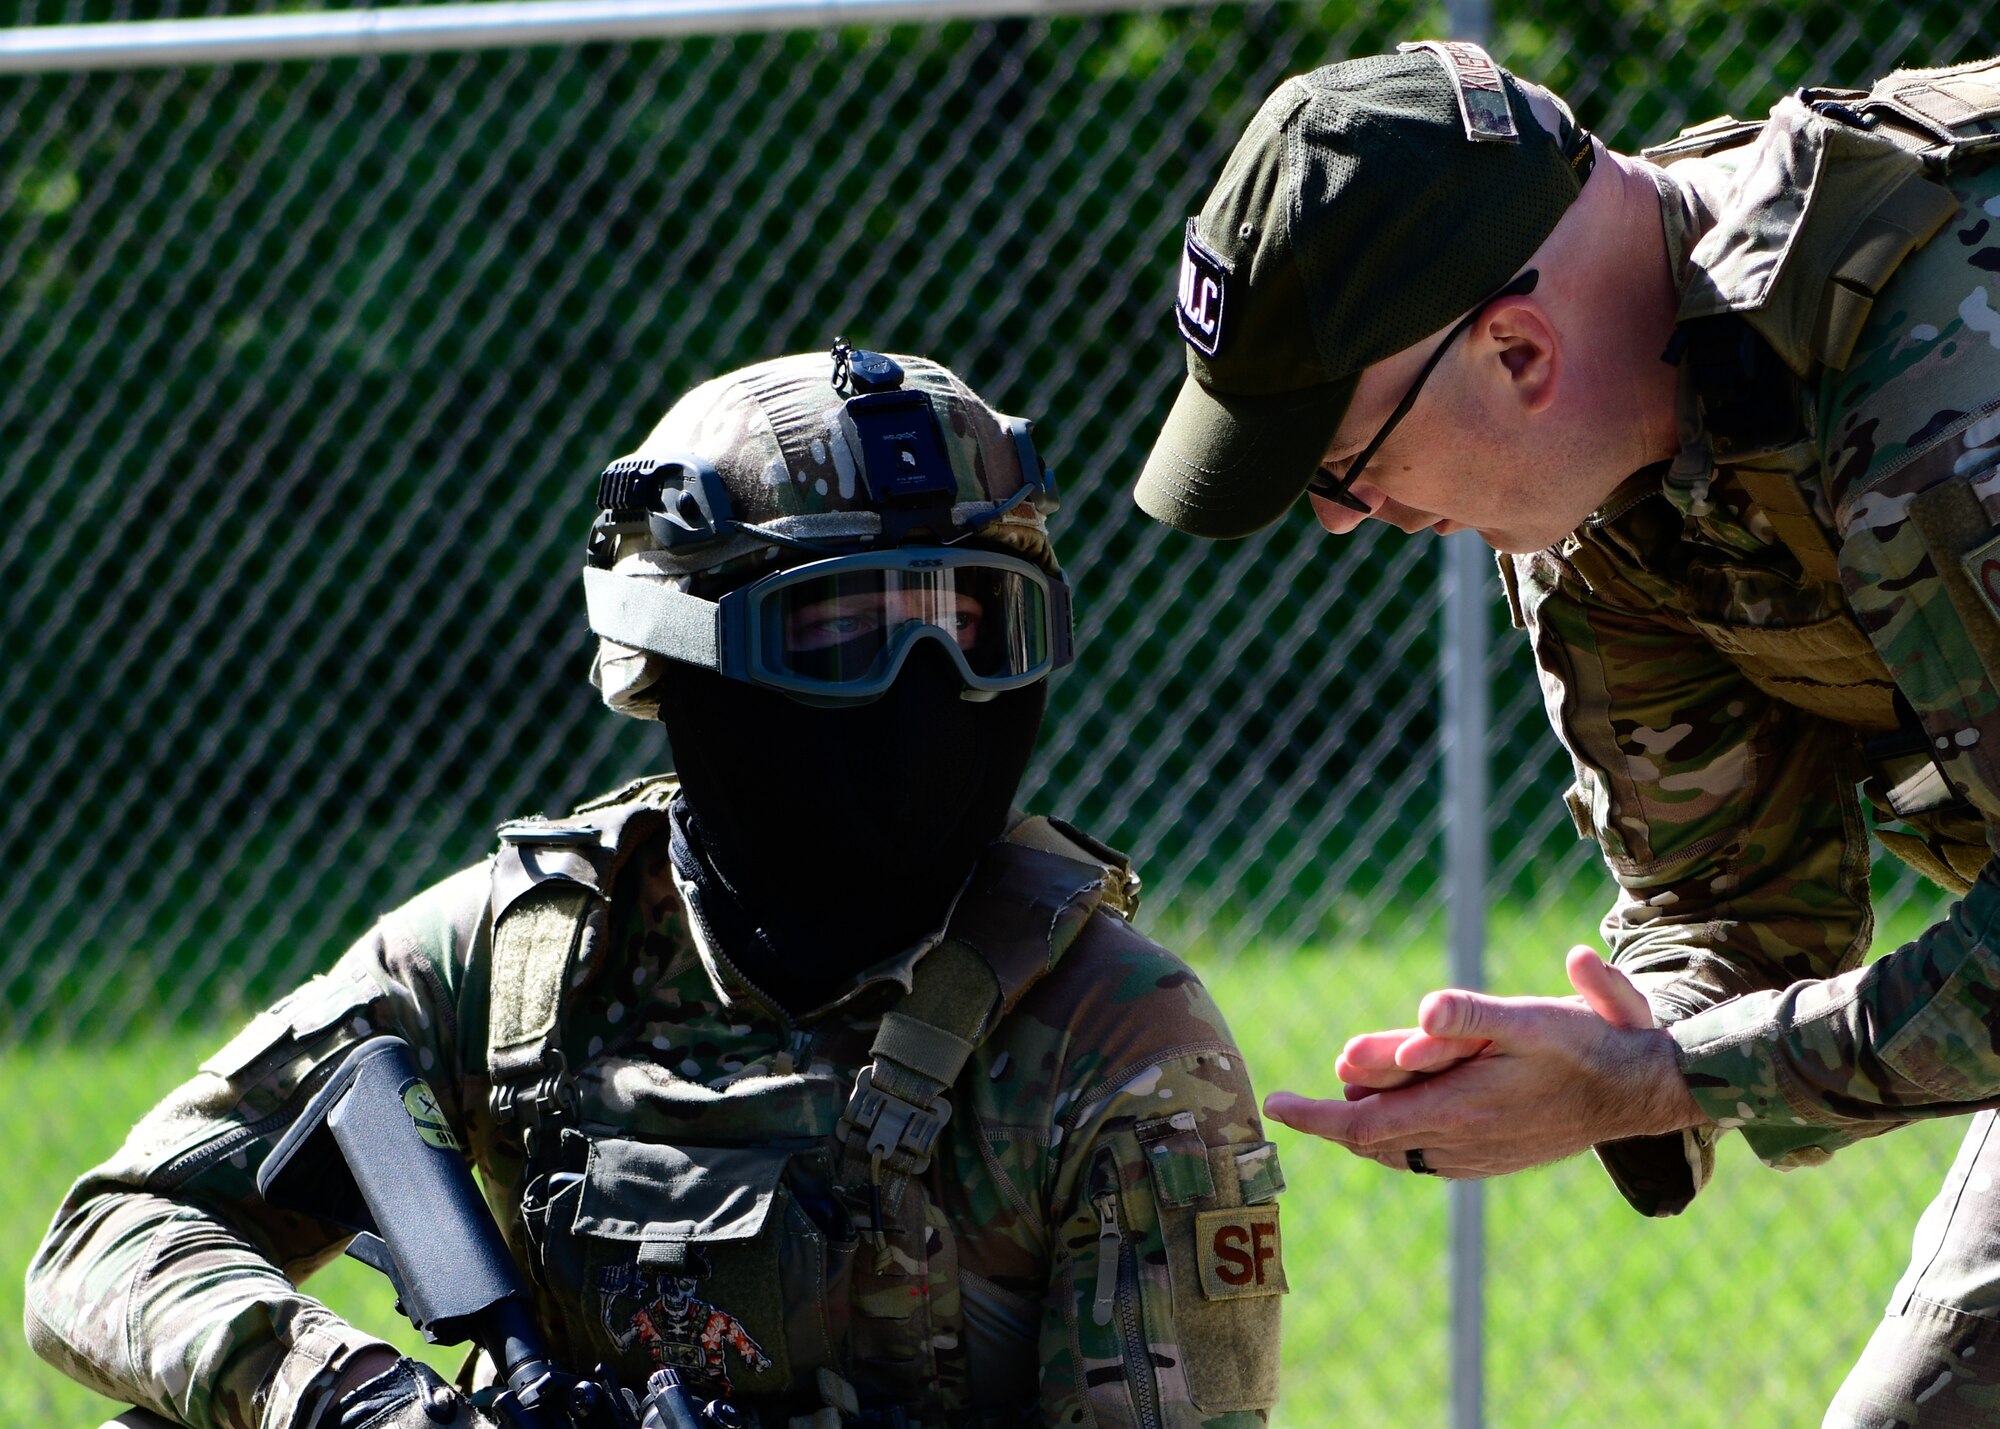 The beta Integrated Defense Leadership Course was held May 10–24, at Youngstown Air Reserve Station and Camp James A. Garfield, Ohio, to provide Defenders hands-on combat readiness training.